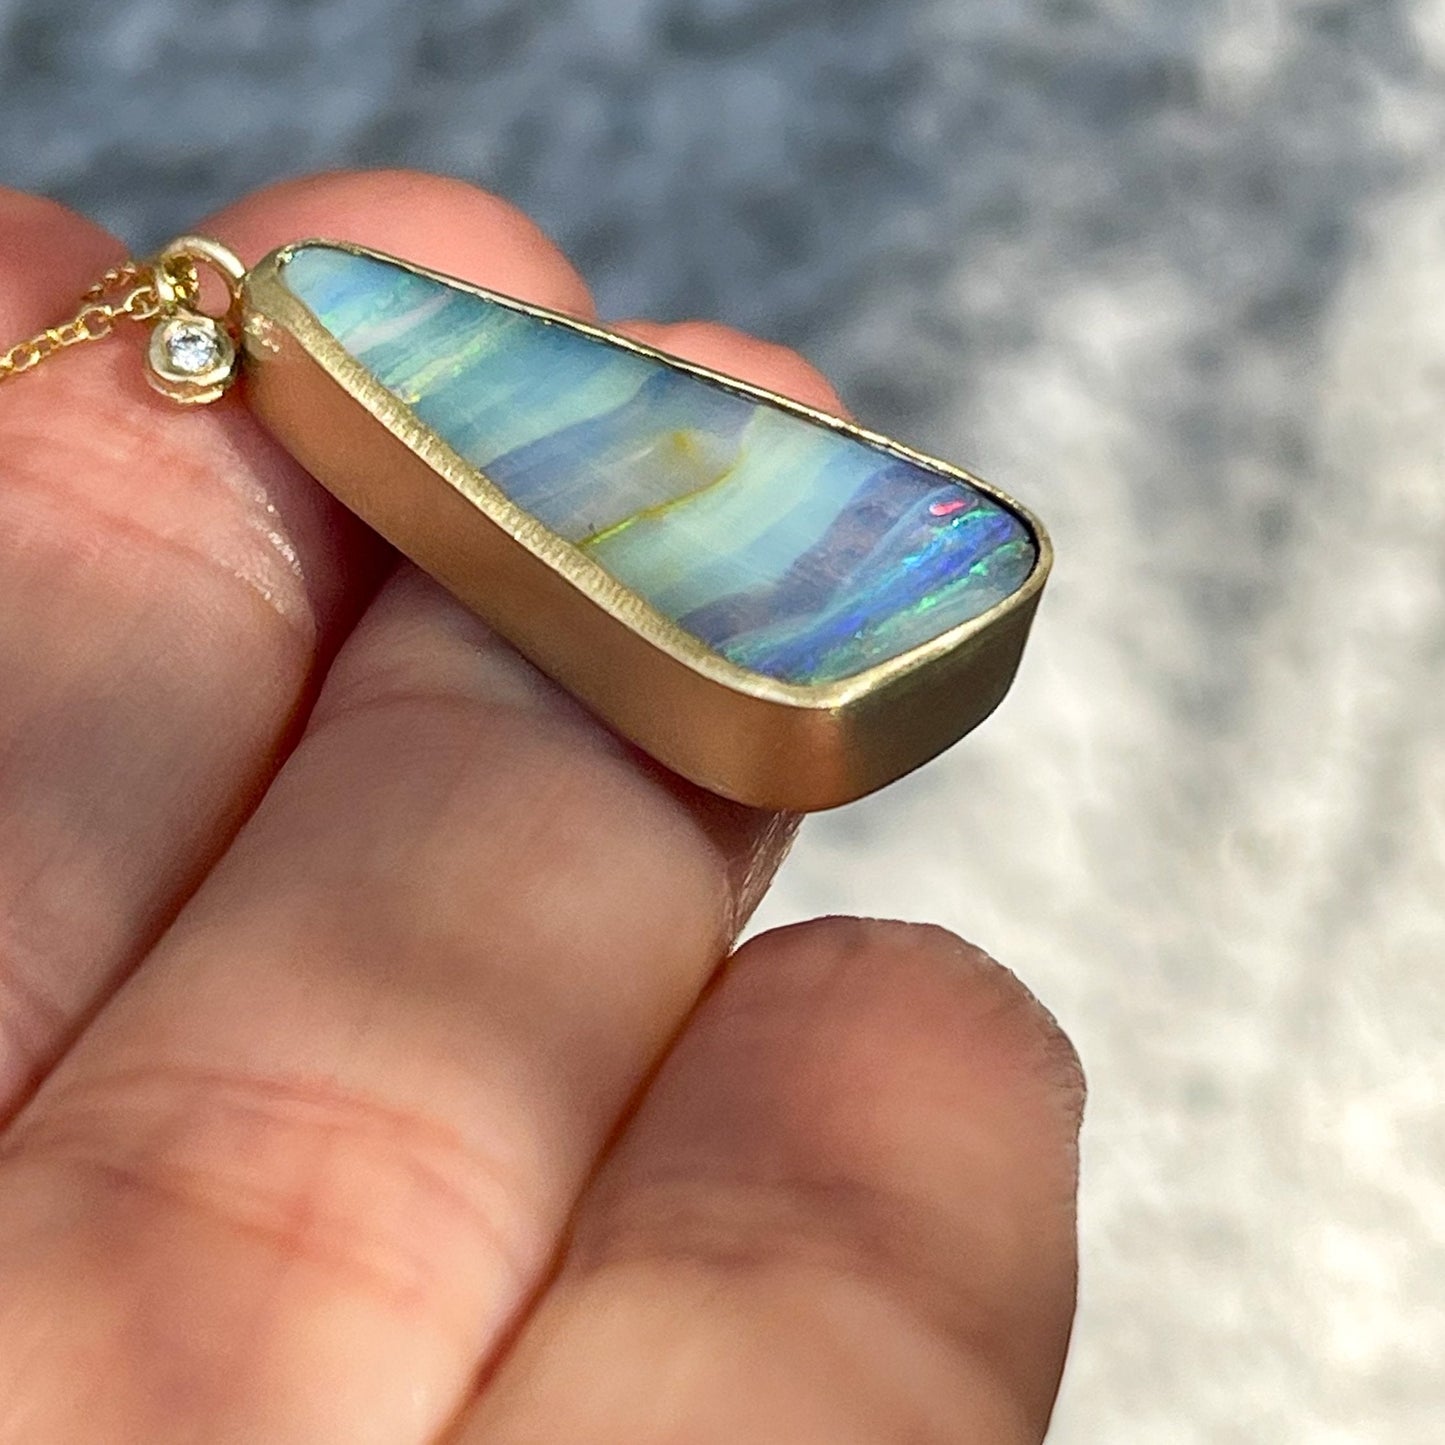 Gold opal necklace by NIXIN Jewelry shown in profile